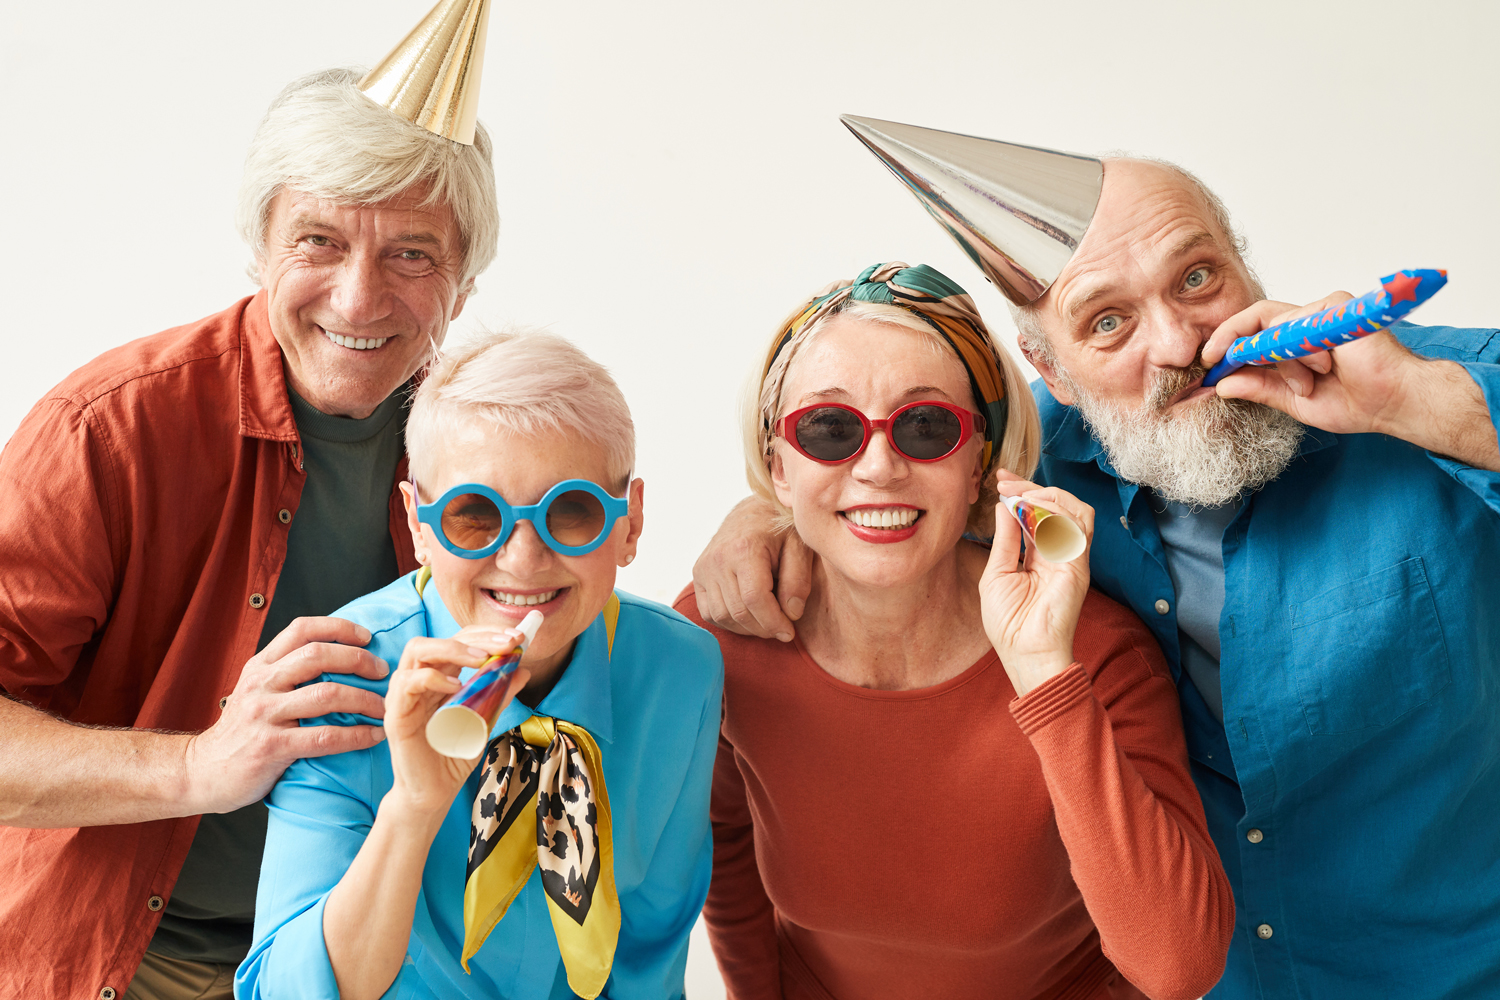 portrait-senior-people-party-hats-sunglasses-smiling-camera-having-fun-against-white-background